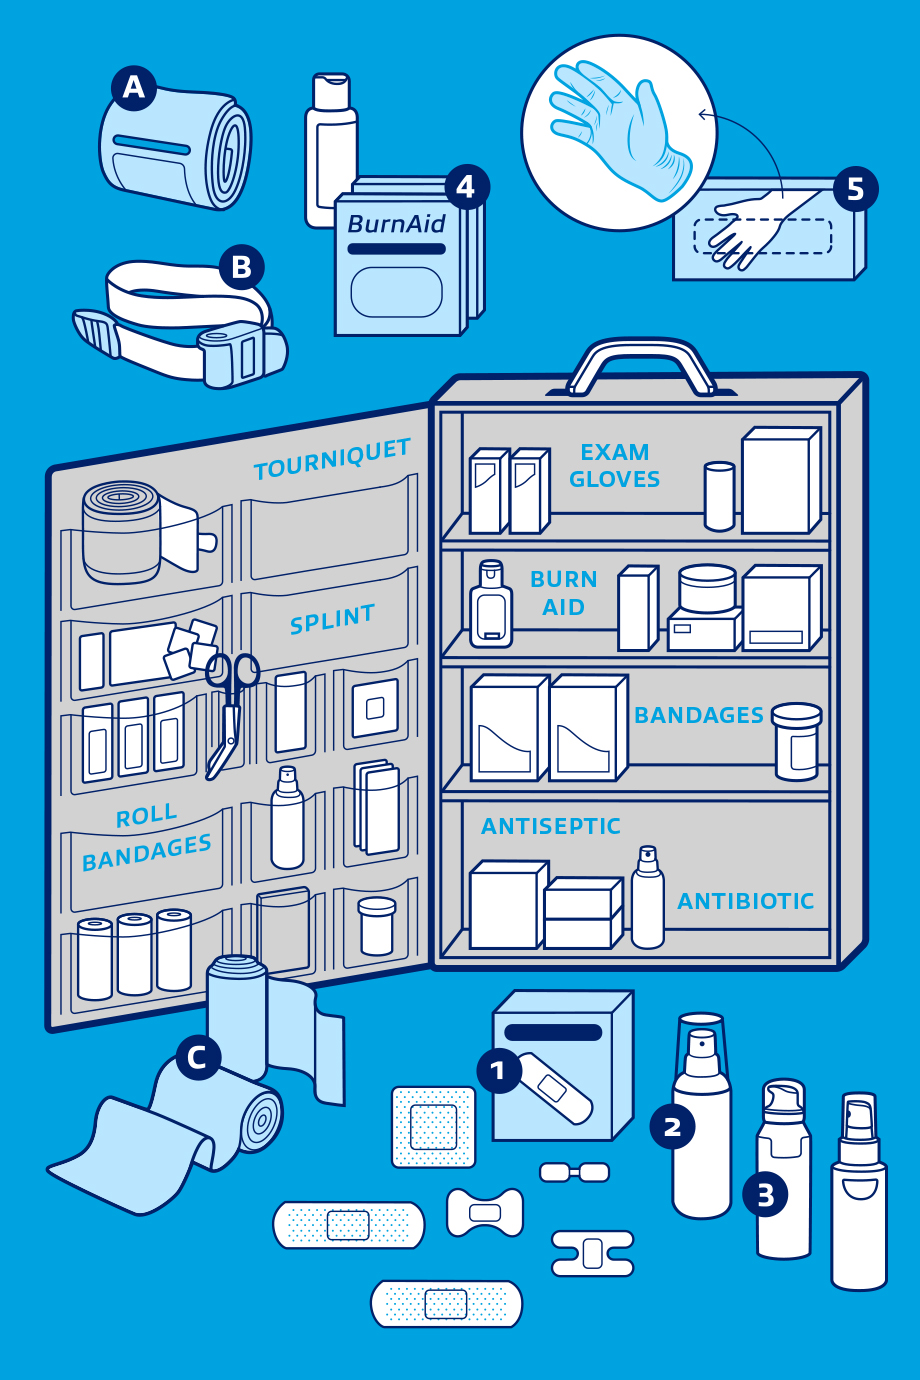 What does a well-stocked first aid kit contain? - First Aid for Free